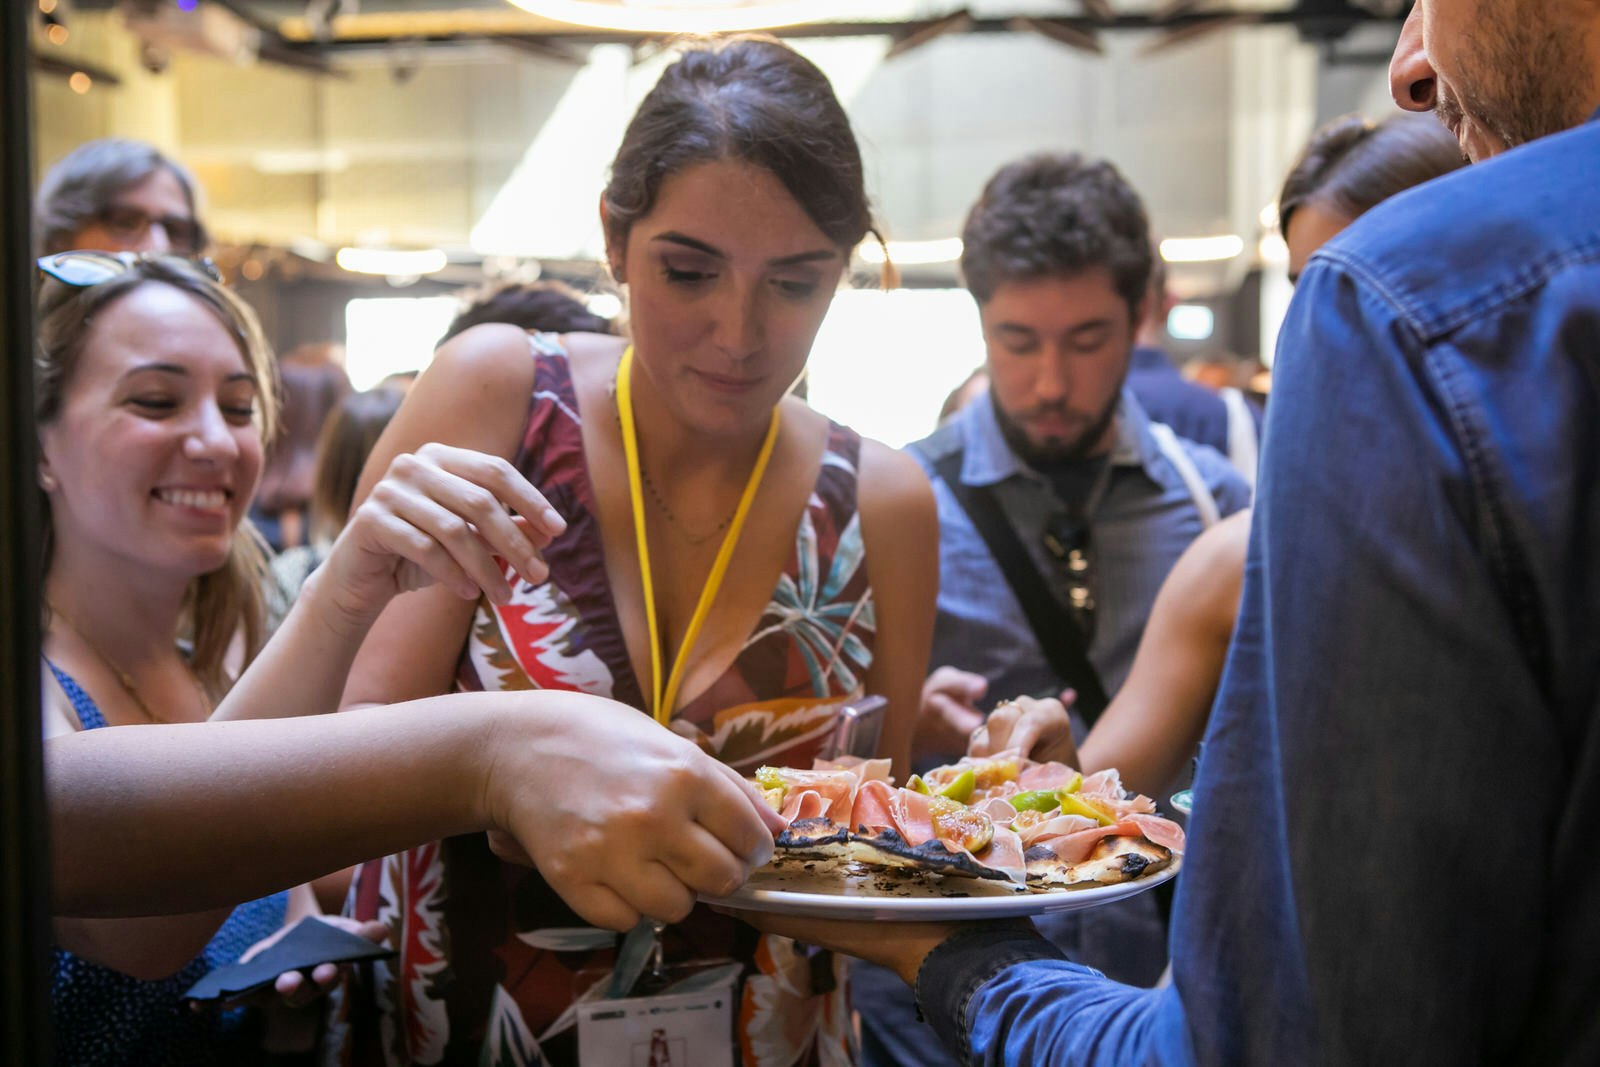 A woman looking down at the plate of food she is holding, surrounded by people who are reaching to get some food from the plate